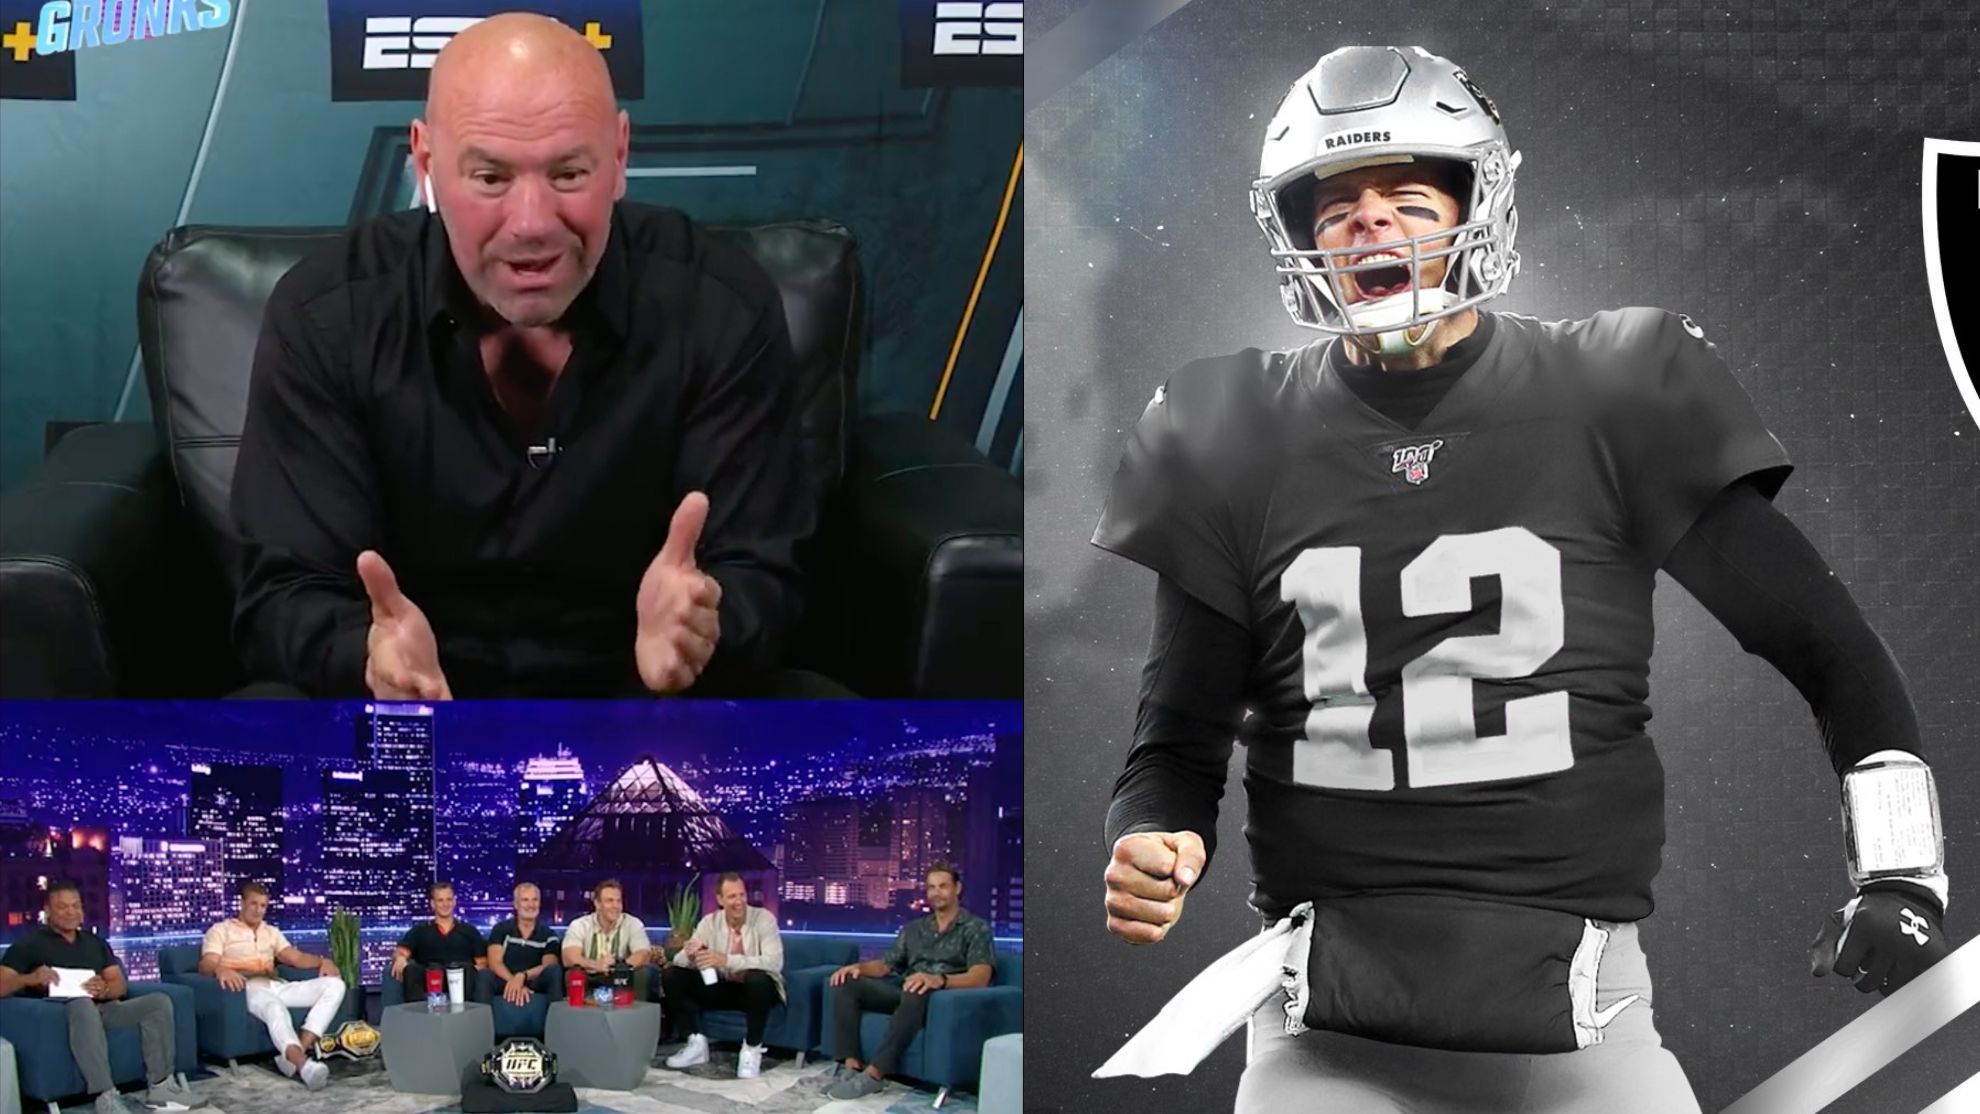 Dana White talks about the deal that he orchestrated in 2020. What Tom Brady (right) would have looked like in a Raiders uniform.